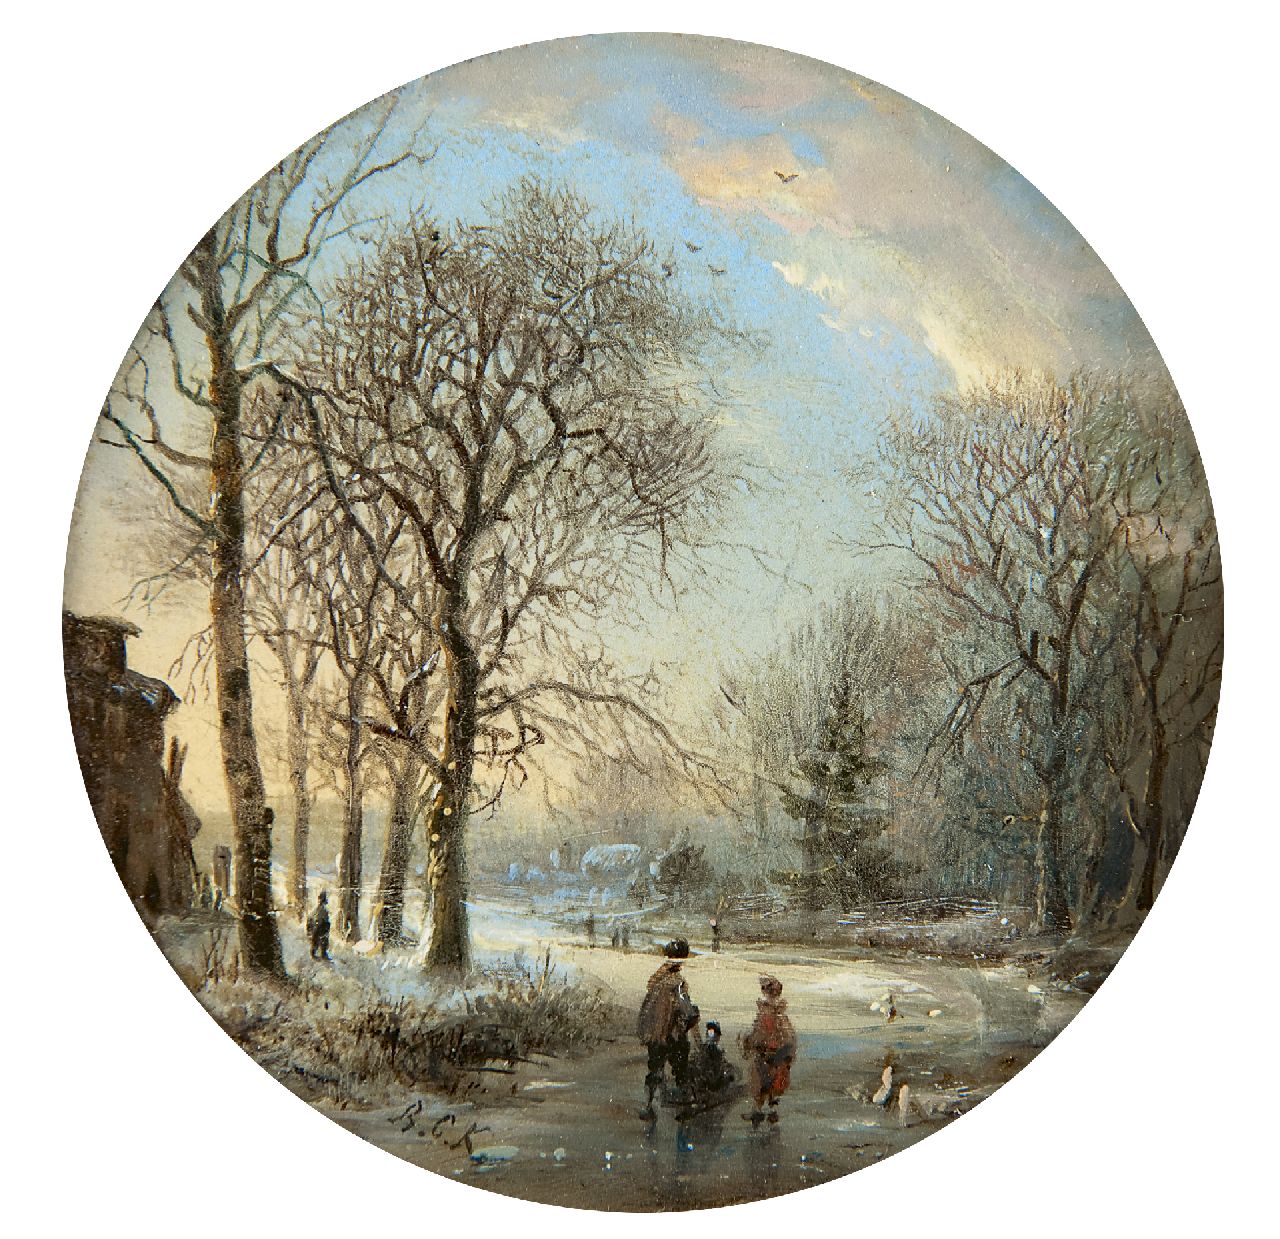 Koekkoek B.C.  | Barend Cornelis Koekkoek, A winter landscape with skaters at sunset, oil on copper 7.0 x 7.0 cm, signed l.l. with initials and painted ca. 1827-1830